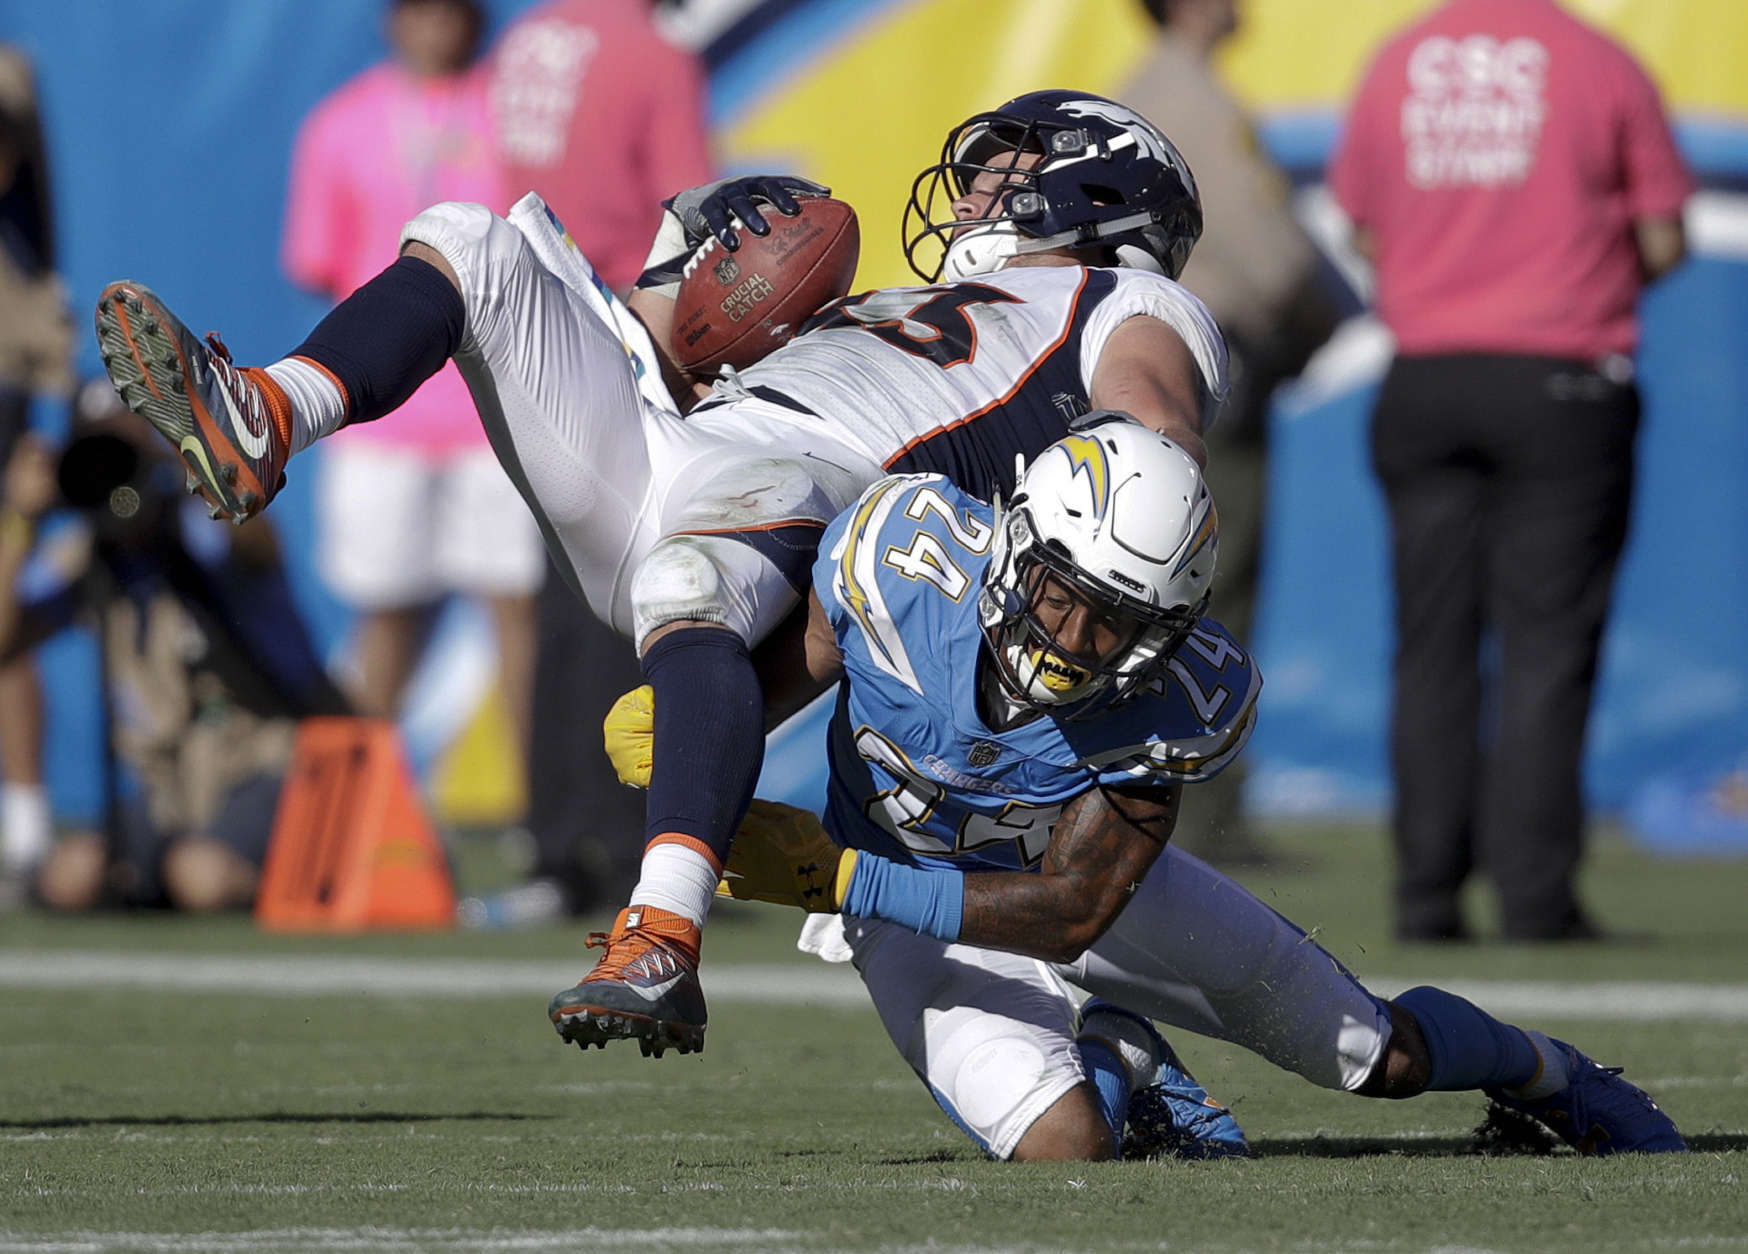 Denver Broncos tight end A.J. Derby, top, is tackled by Los Angeles Chargers cornerback Trevor Williams during the second half of an NFL football game Sunday, Oct. 22, 2017, in Carson, Calif. (AP Photo/Jae C. Hong)